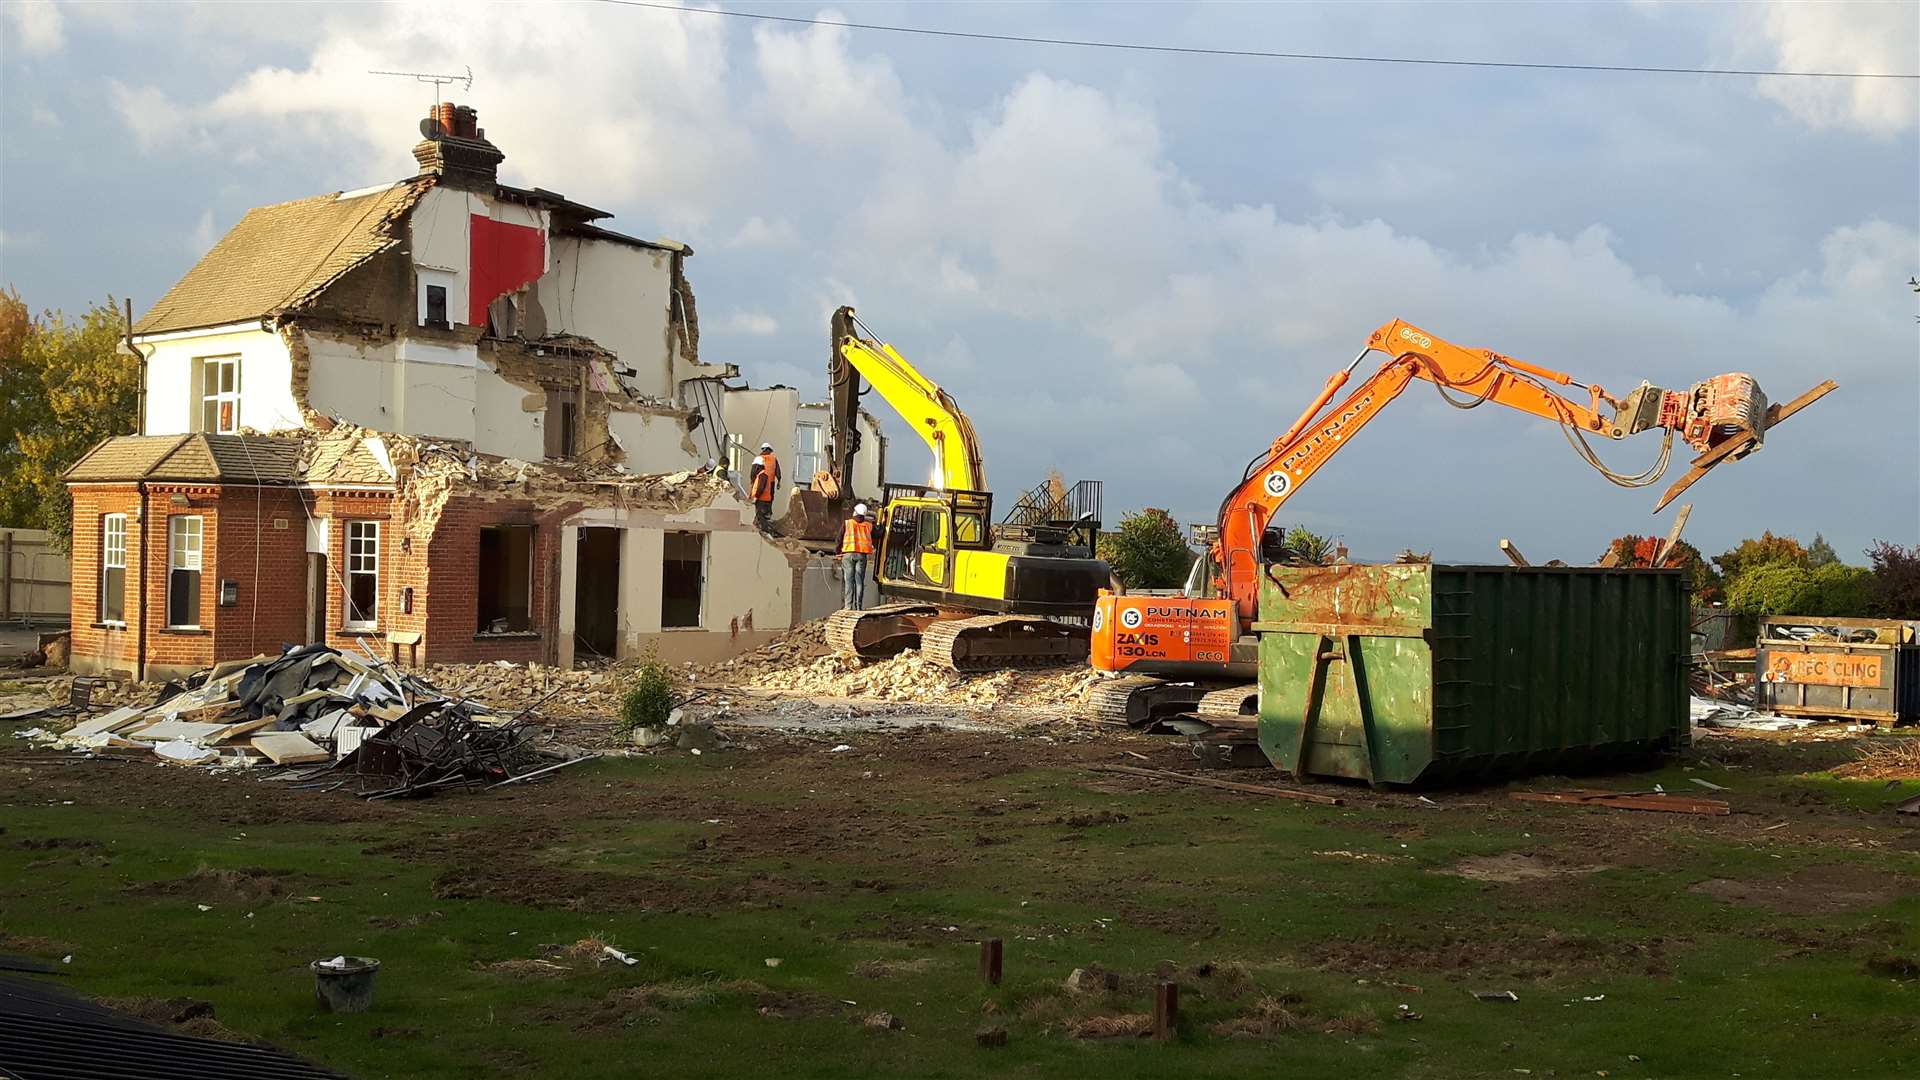 The Battle of Britain pub was demolished without permission. Photo: Lizzie Massey